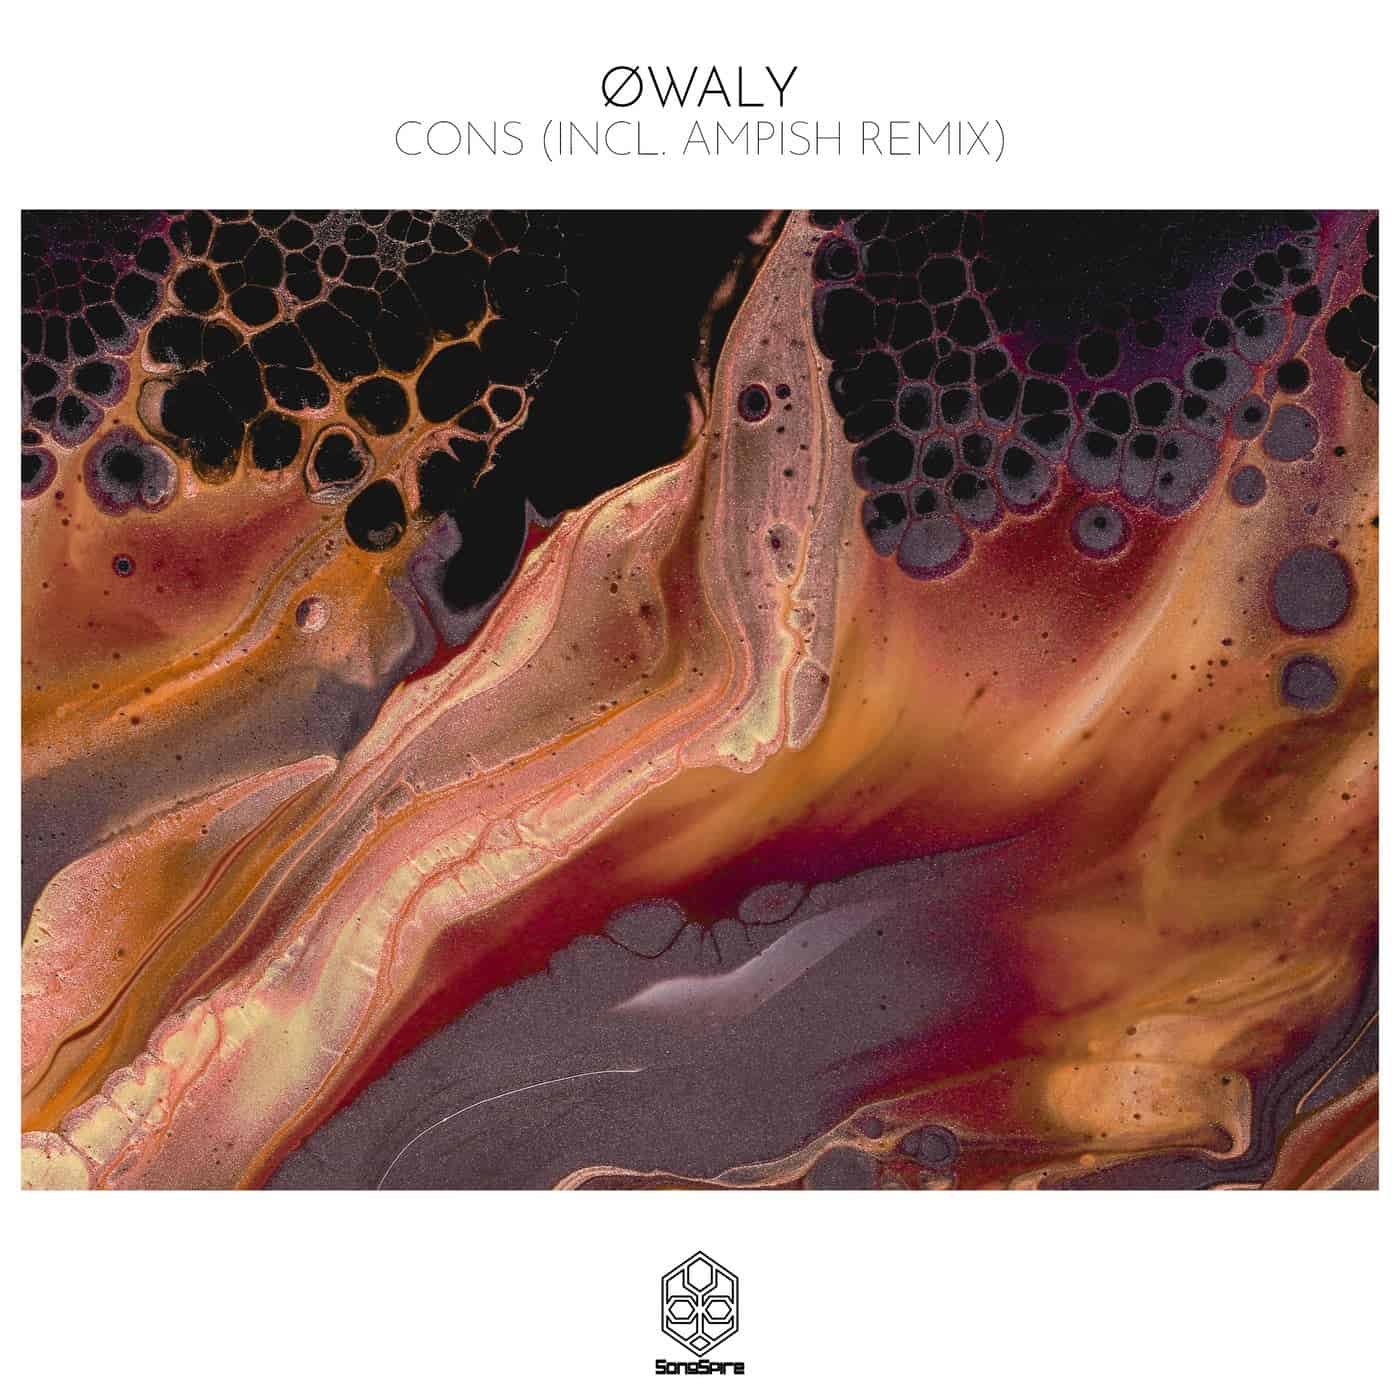 image cover: Cons by Øwalŷ on Songspire Records